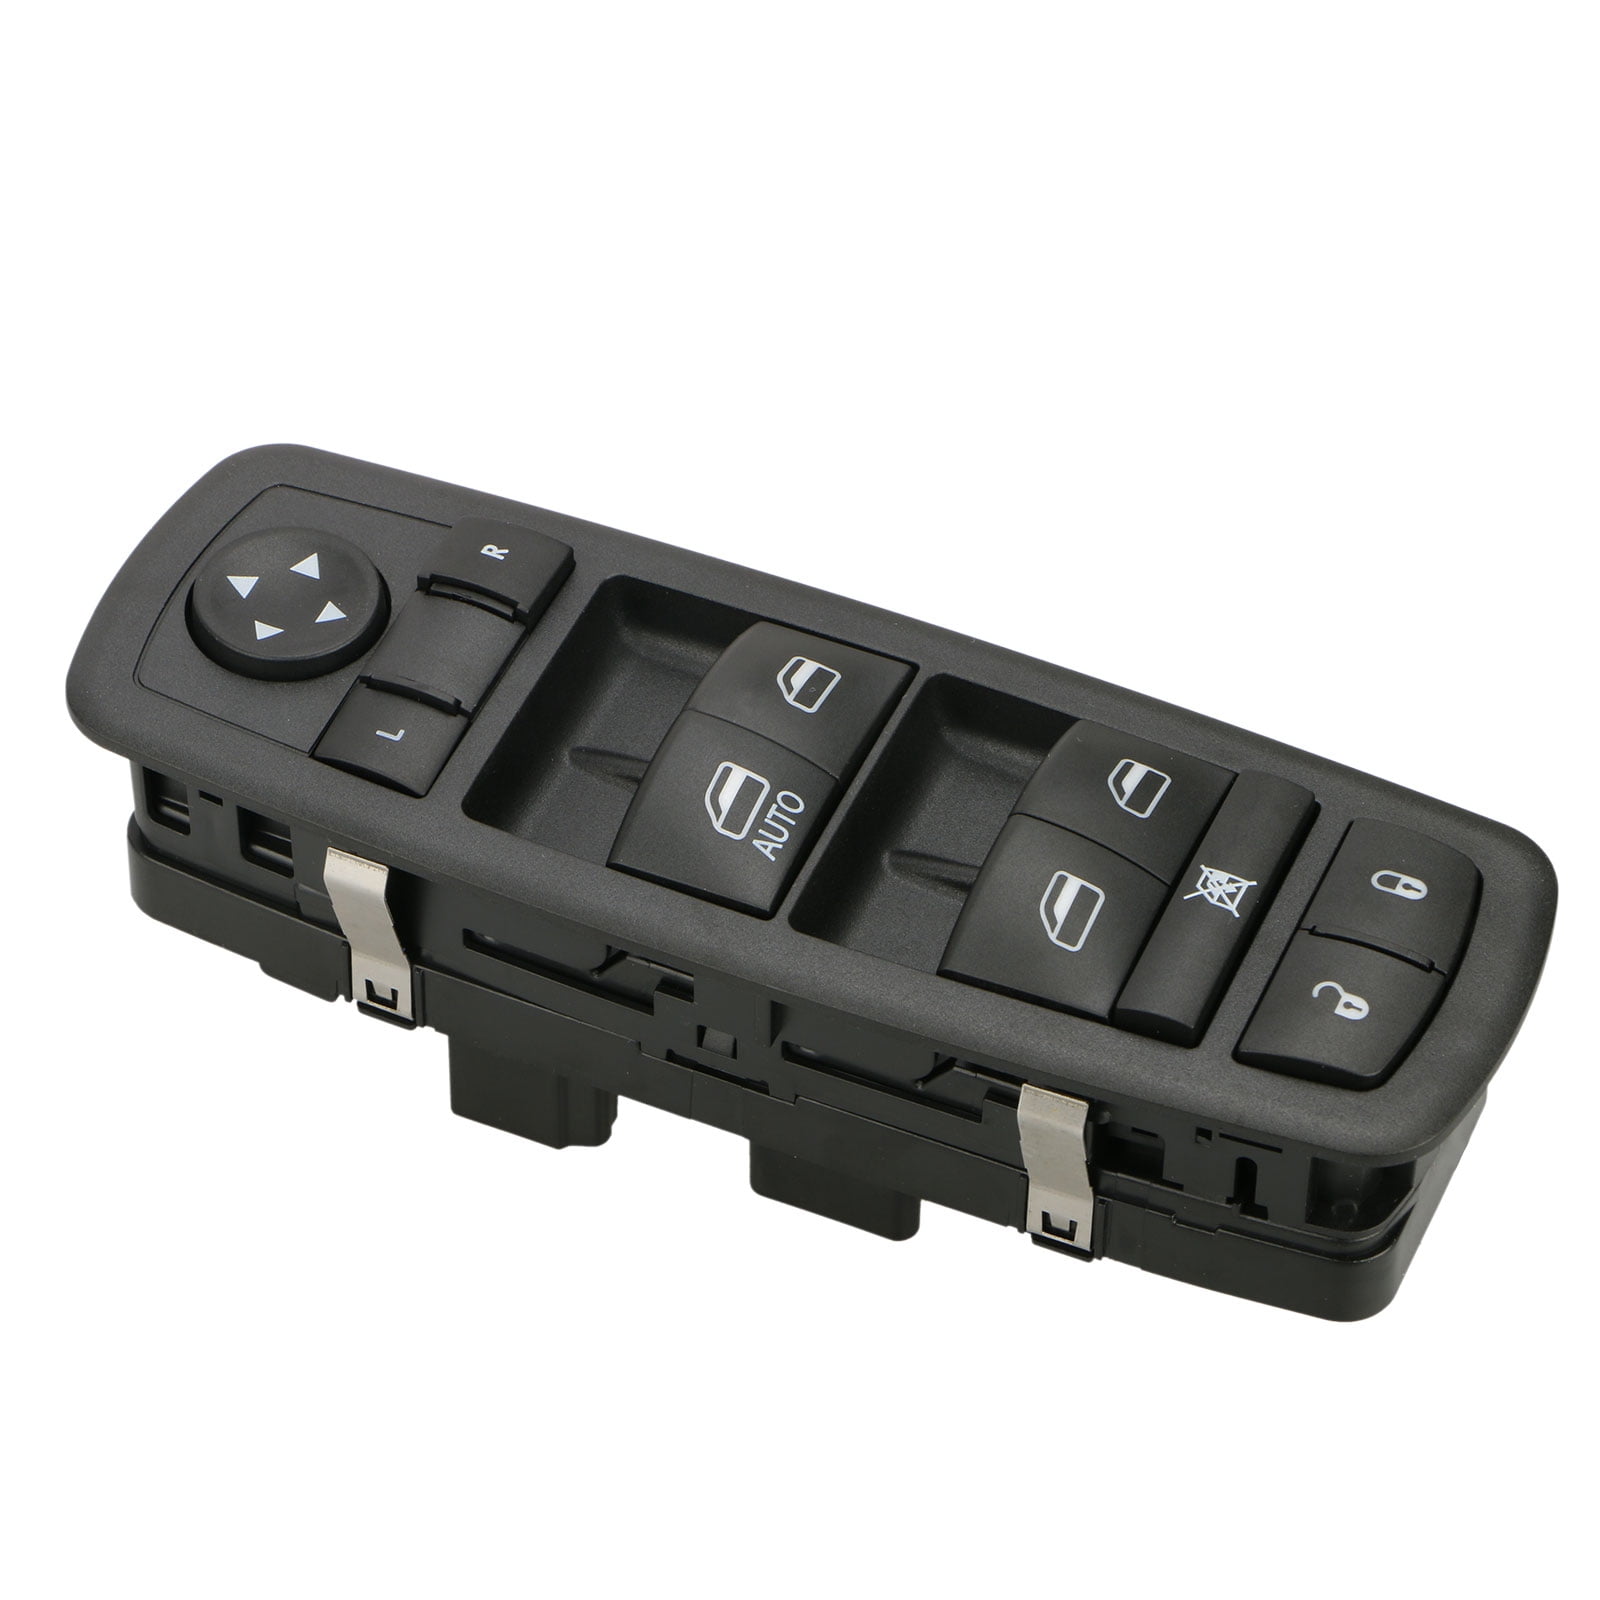 4602632AD 4602632AF 2009-2010 Dodge Journey Jeep Liberty 4602632AC 4602632AH Replaces 4602632AG Driver Side Power Window Switch Compatible with 2008-2012 Dodge Nitro